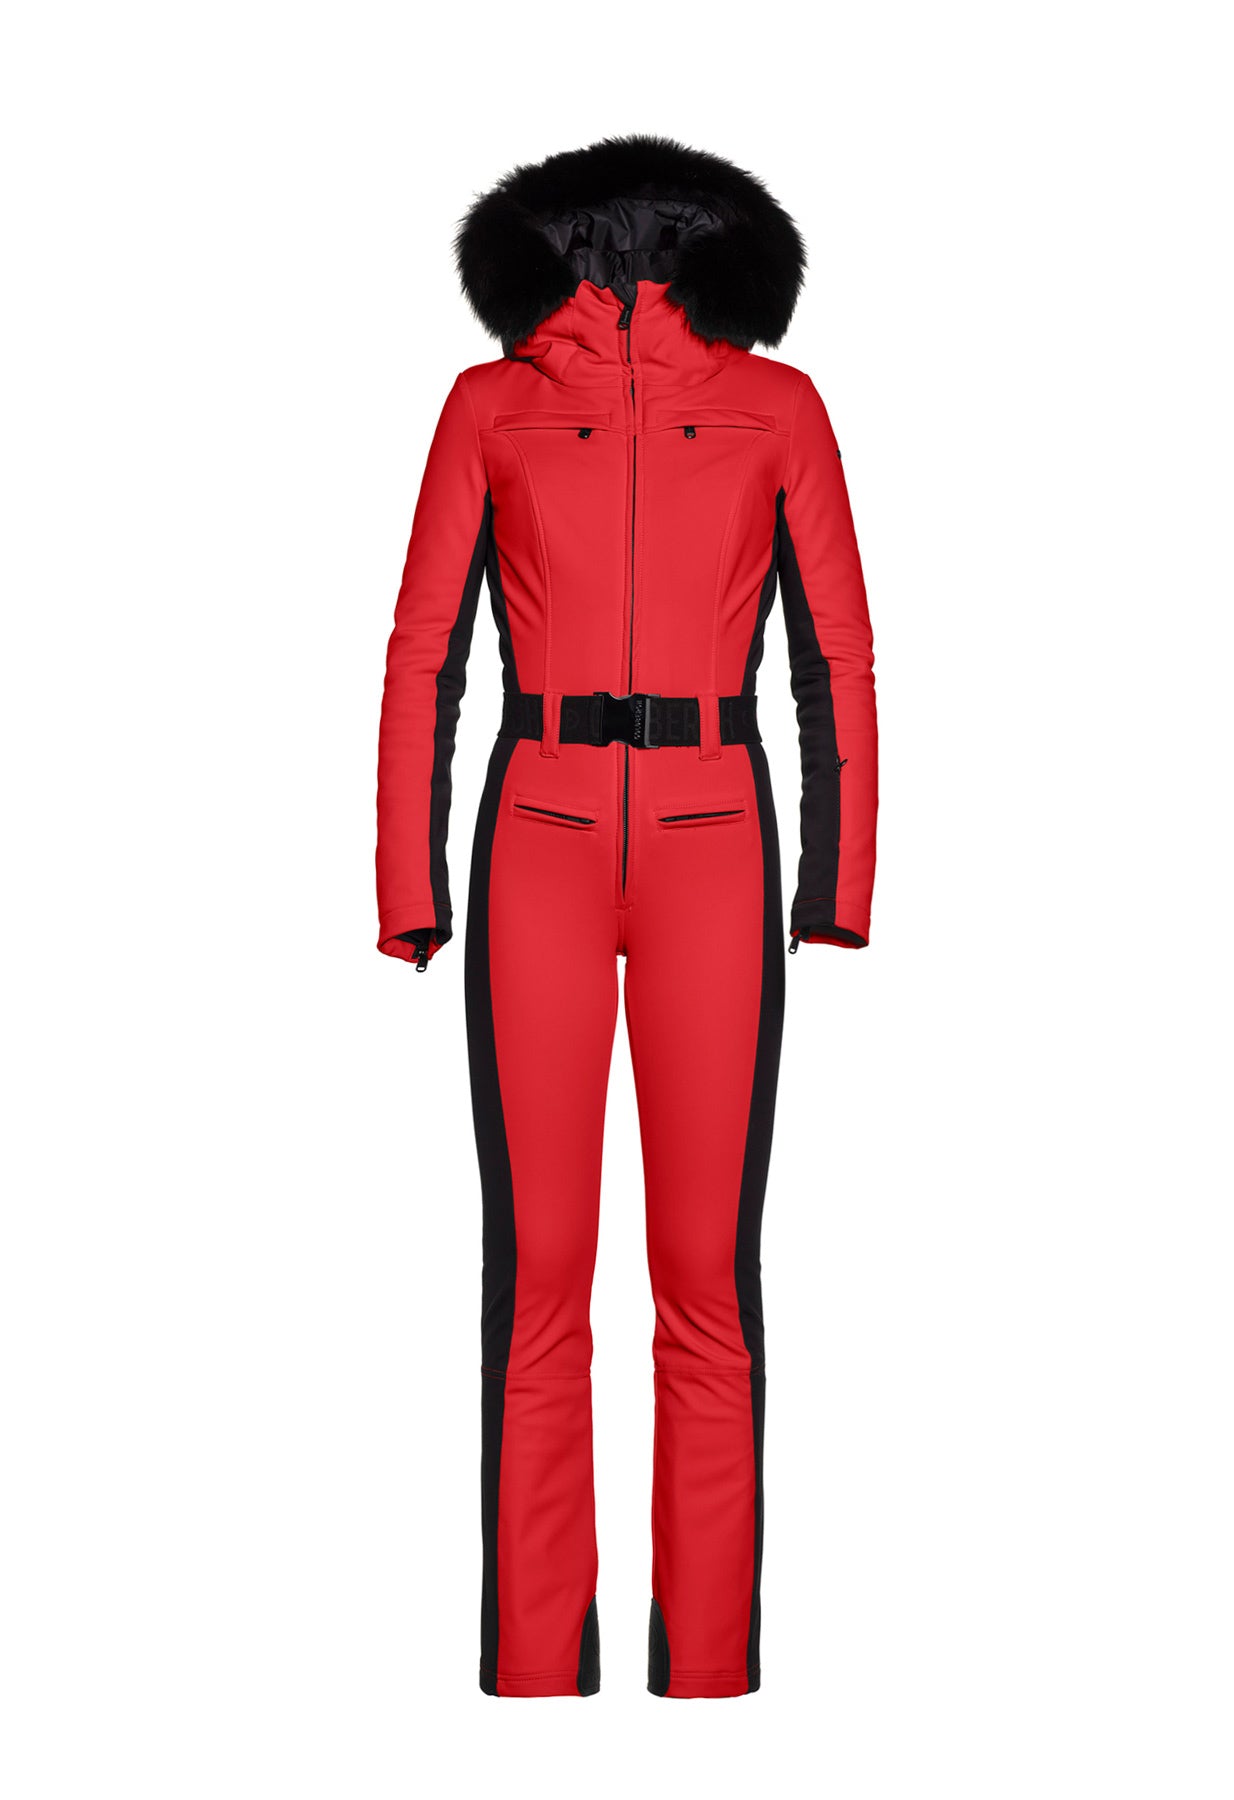 Goldbergh Parry One Piece Ski Suit in Flame Red with Faux Fur Hood